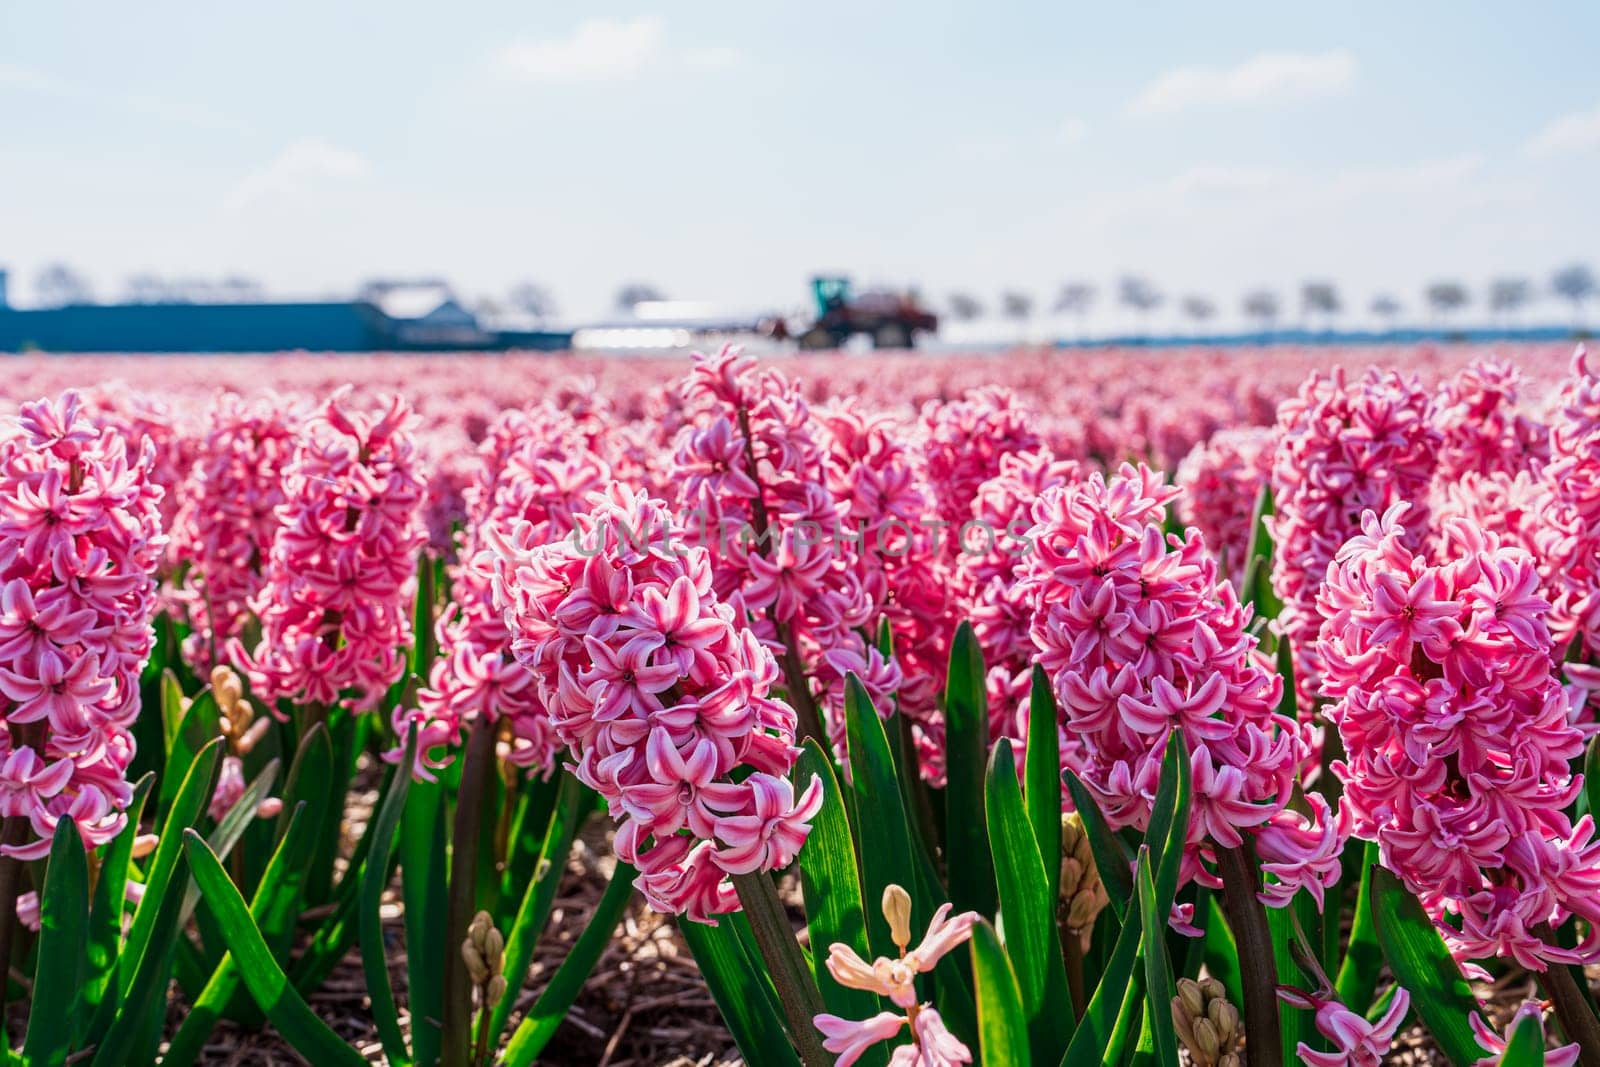 Huge Pink Aromatic Field of Blooming Hyacinths in Bright Day. Captivating Sights of Fragrance and Beauty